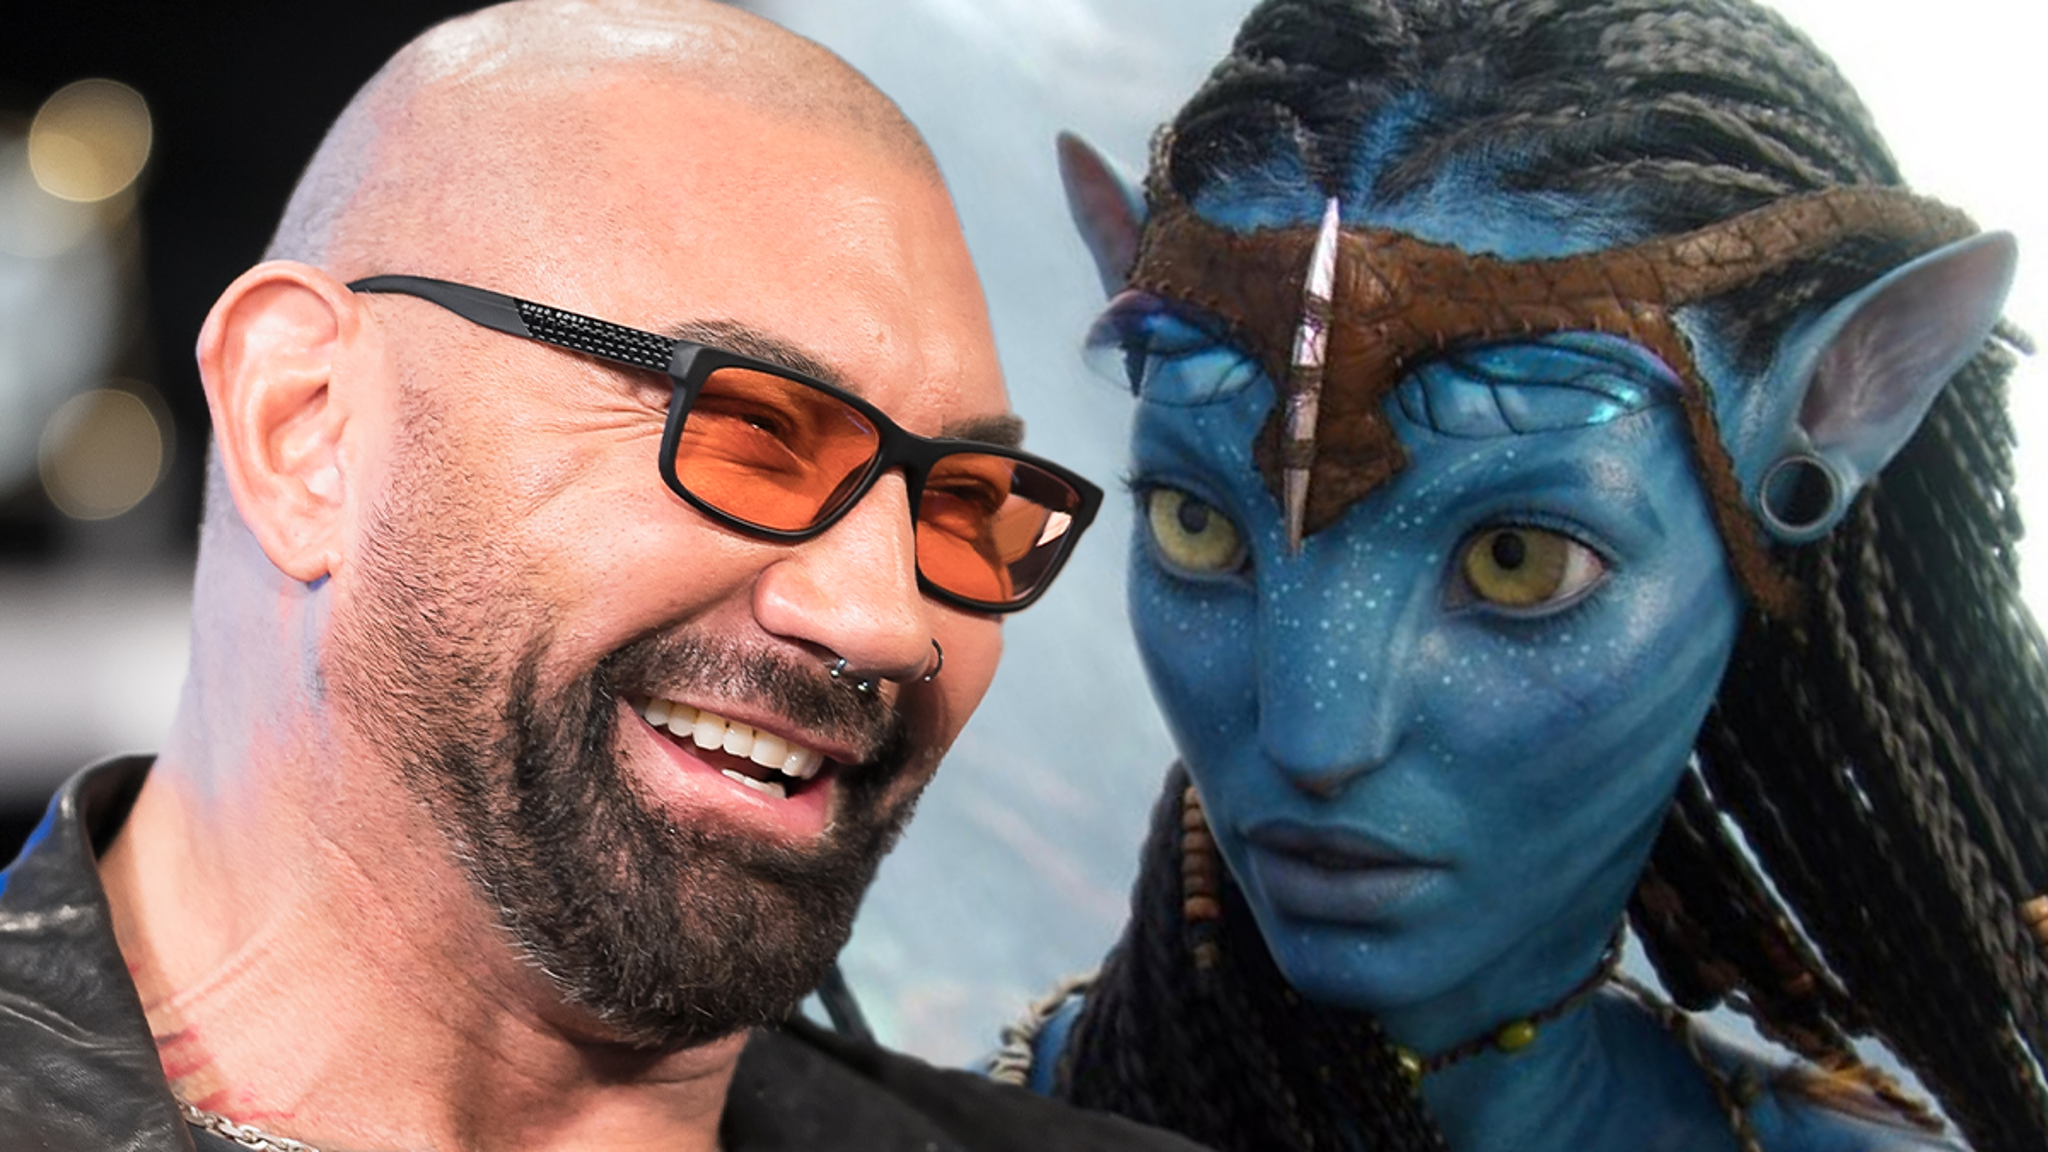 Dave Bautista's New Movie 'Knock at the Cabin' Aiming to Sink 'Avatar' - TMZ : Two movies out in theaters this weekend are projected to topple 'Avatar 2' at the box office ... this after a 7-week run at #1.  | Tranquility 國際社群